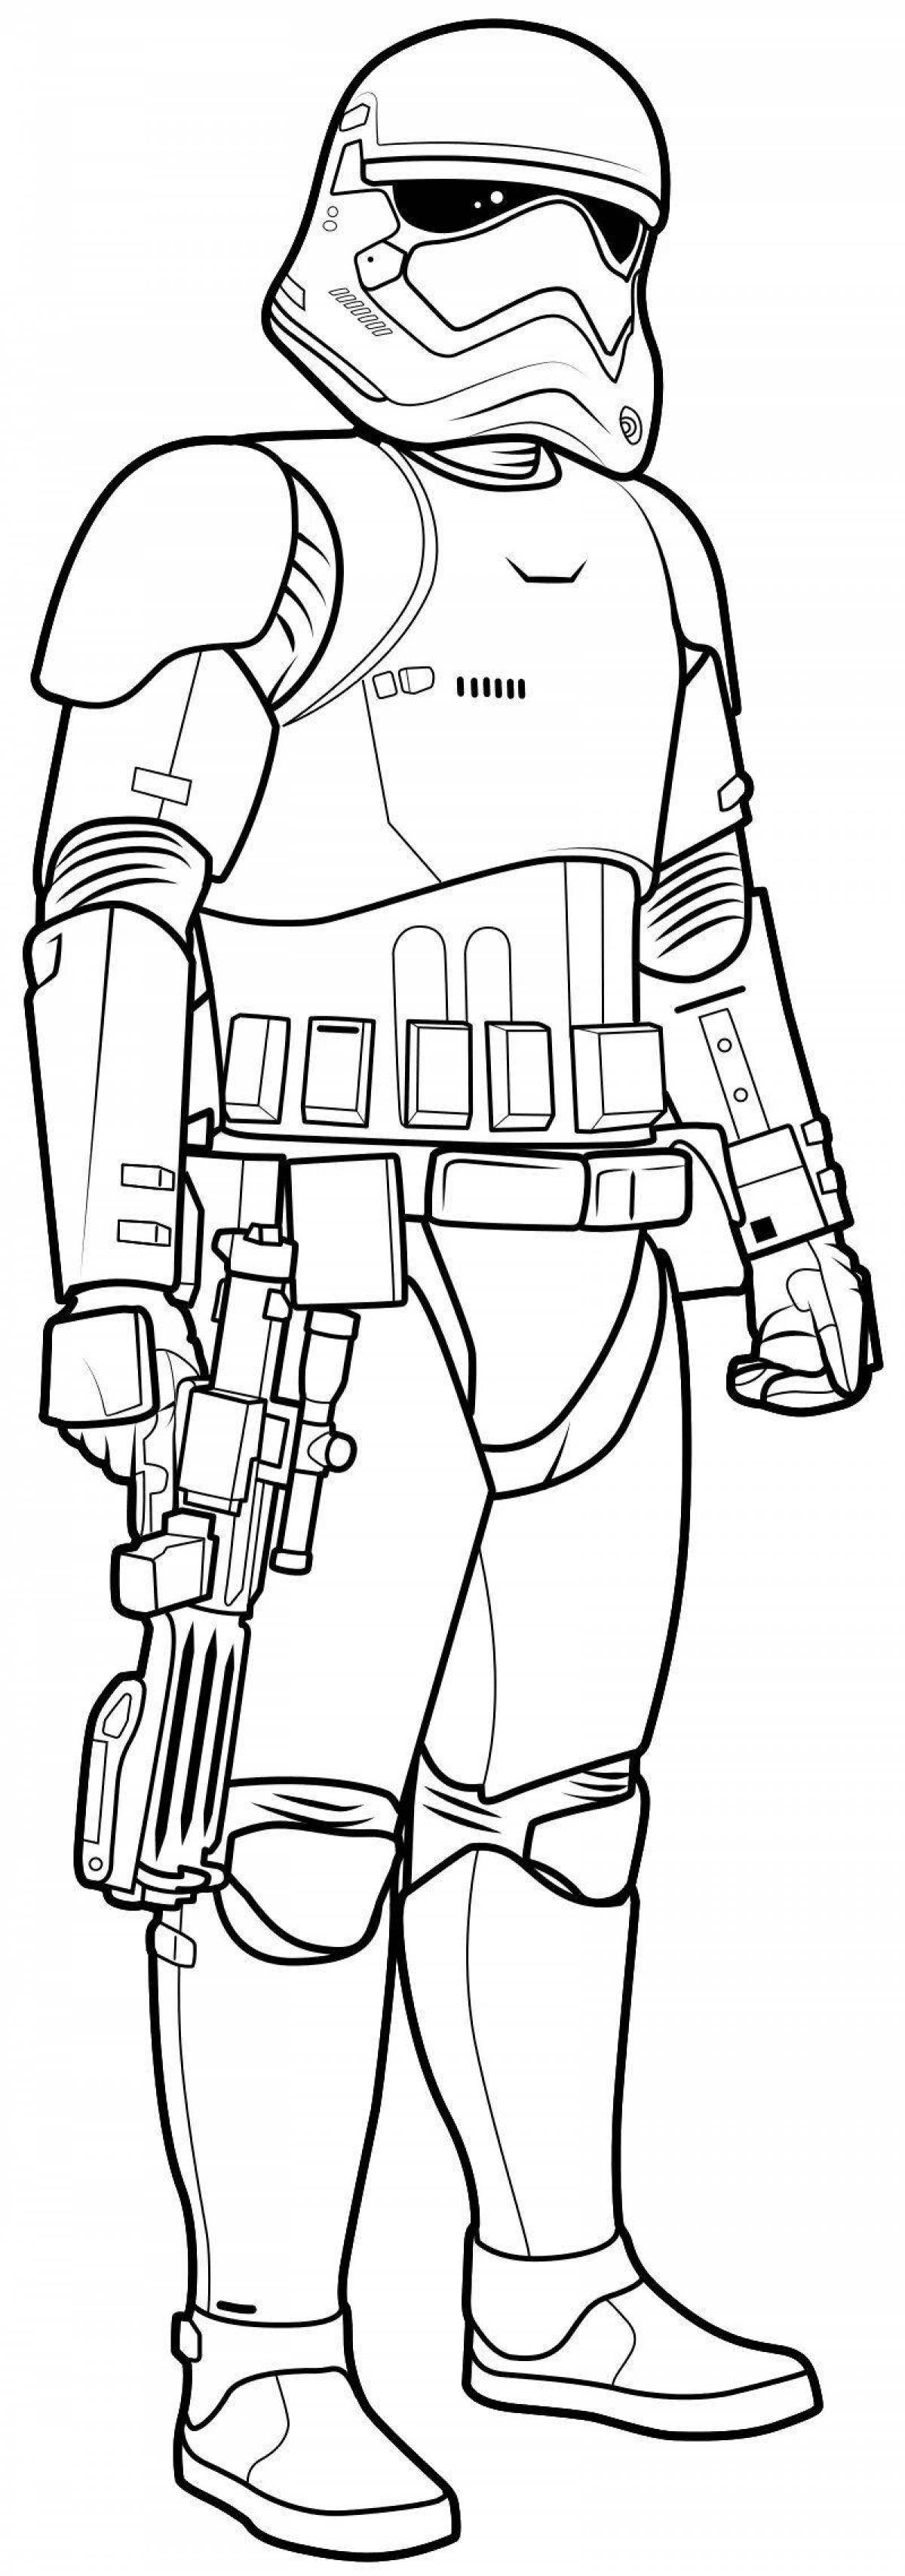 Star wars stormtrooper coloring page